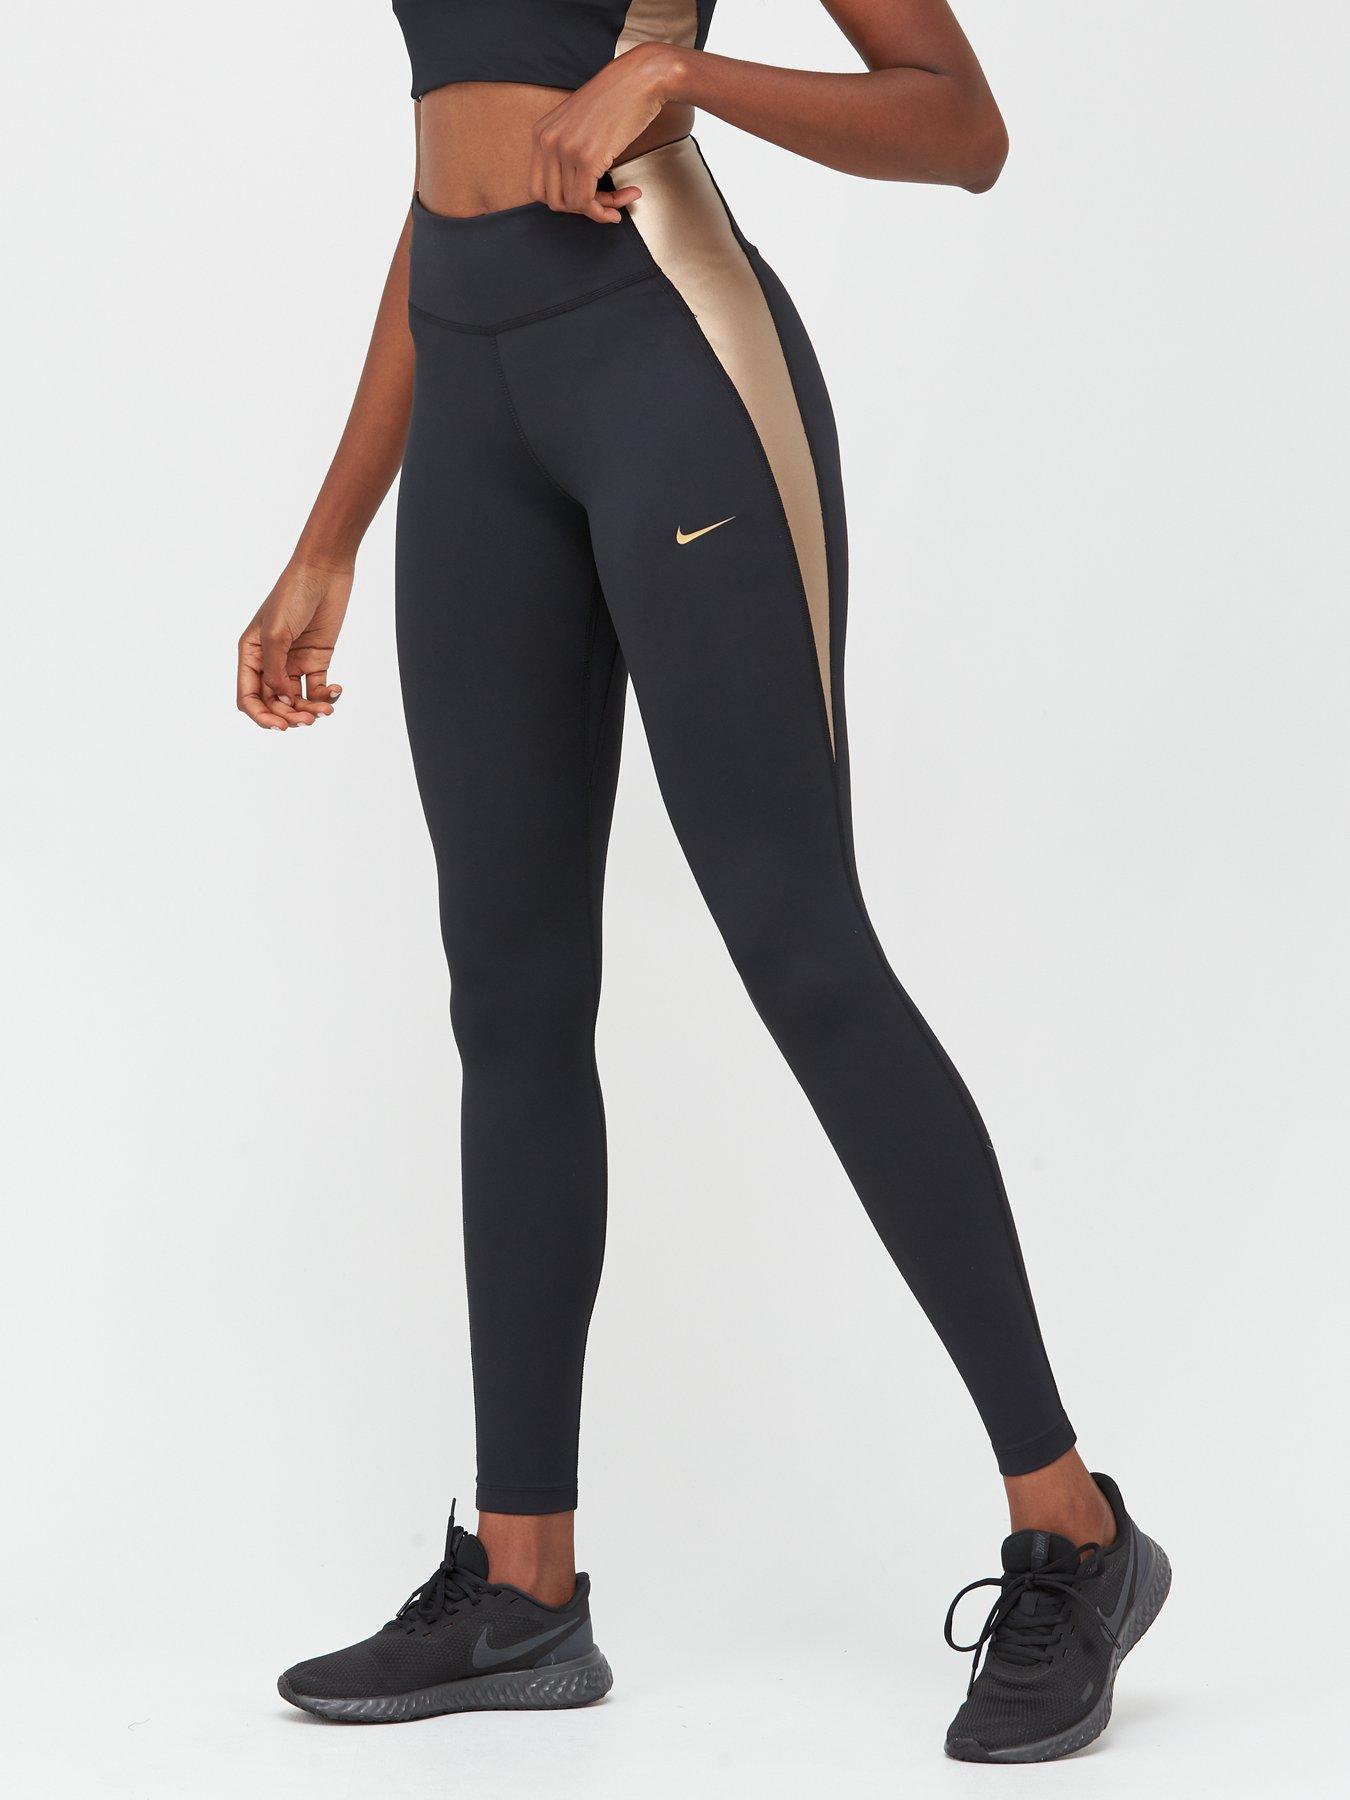 nike black and gold tights